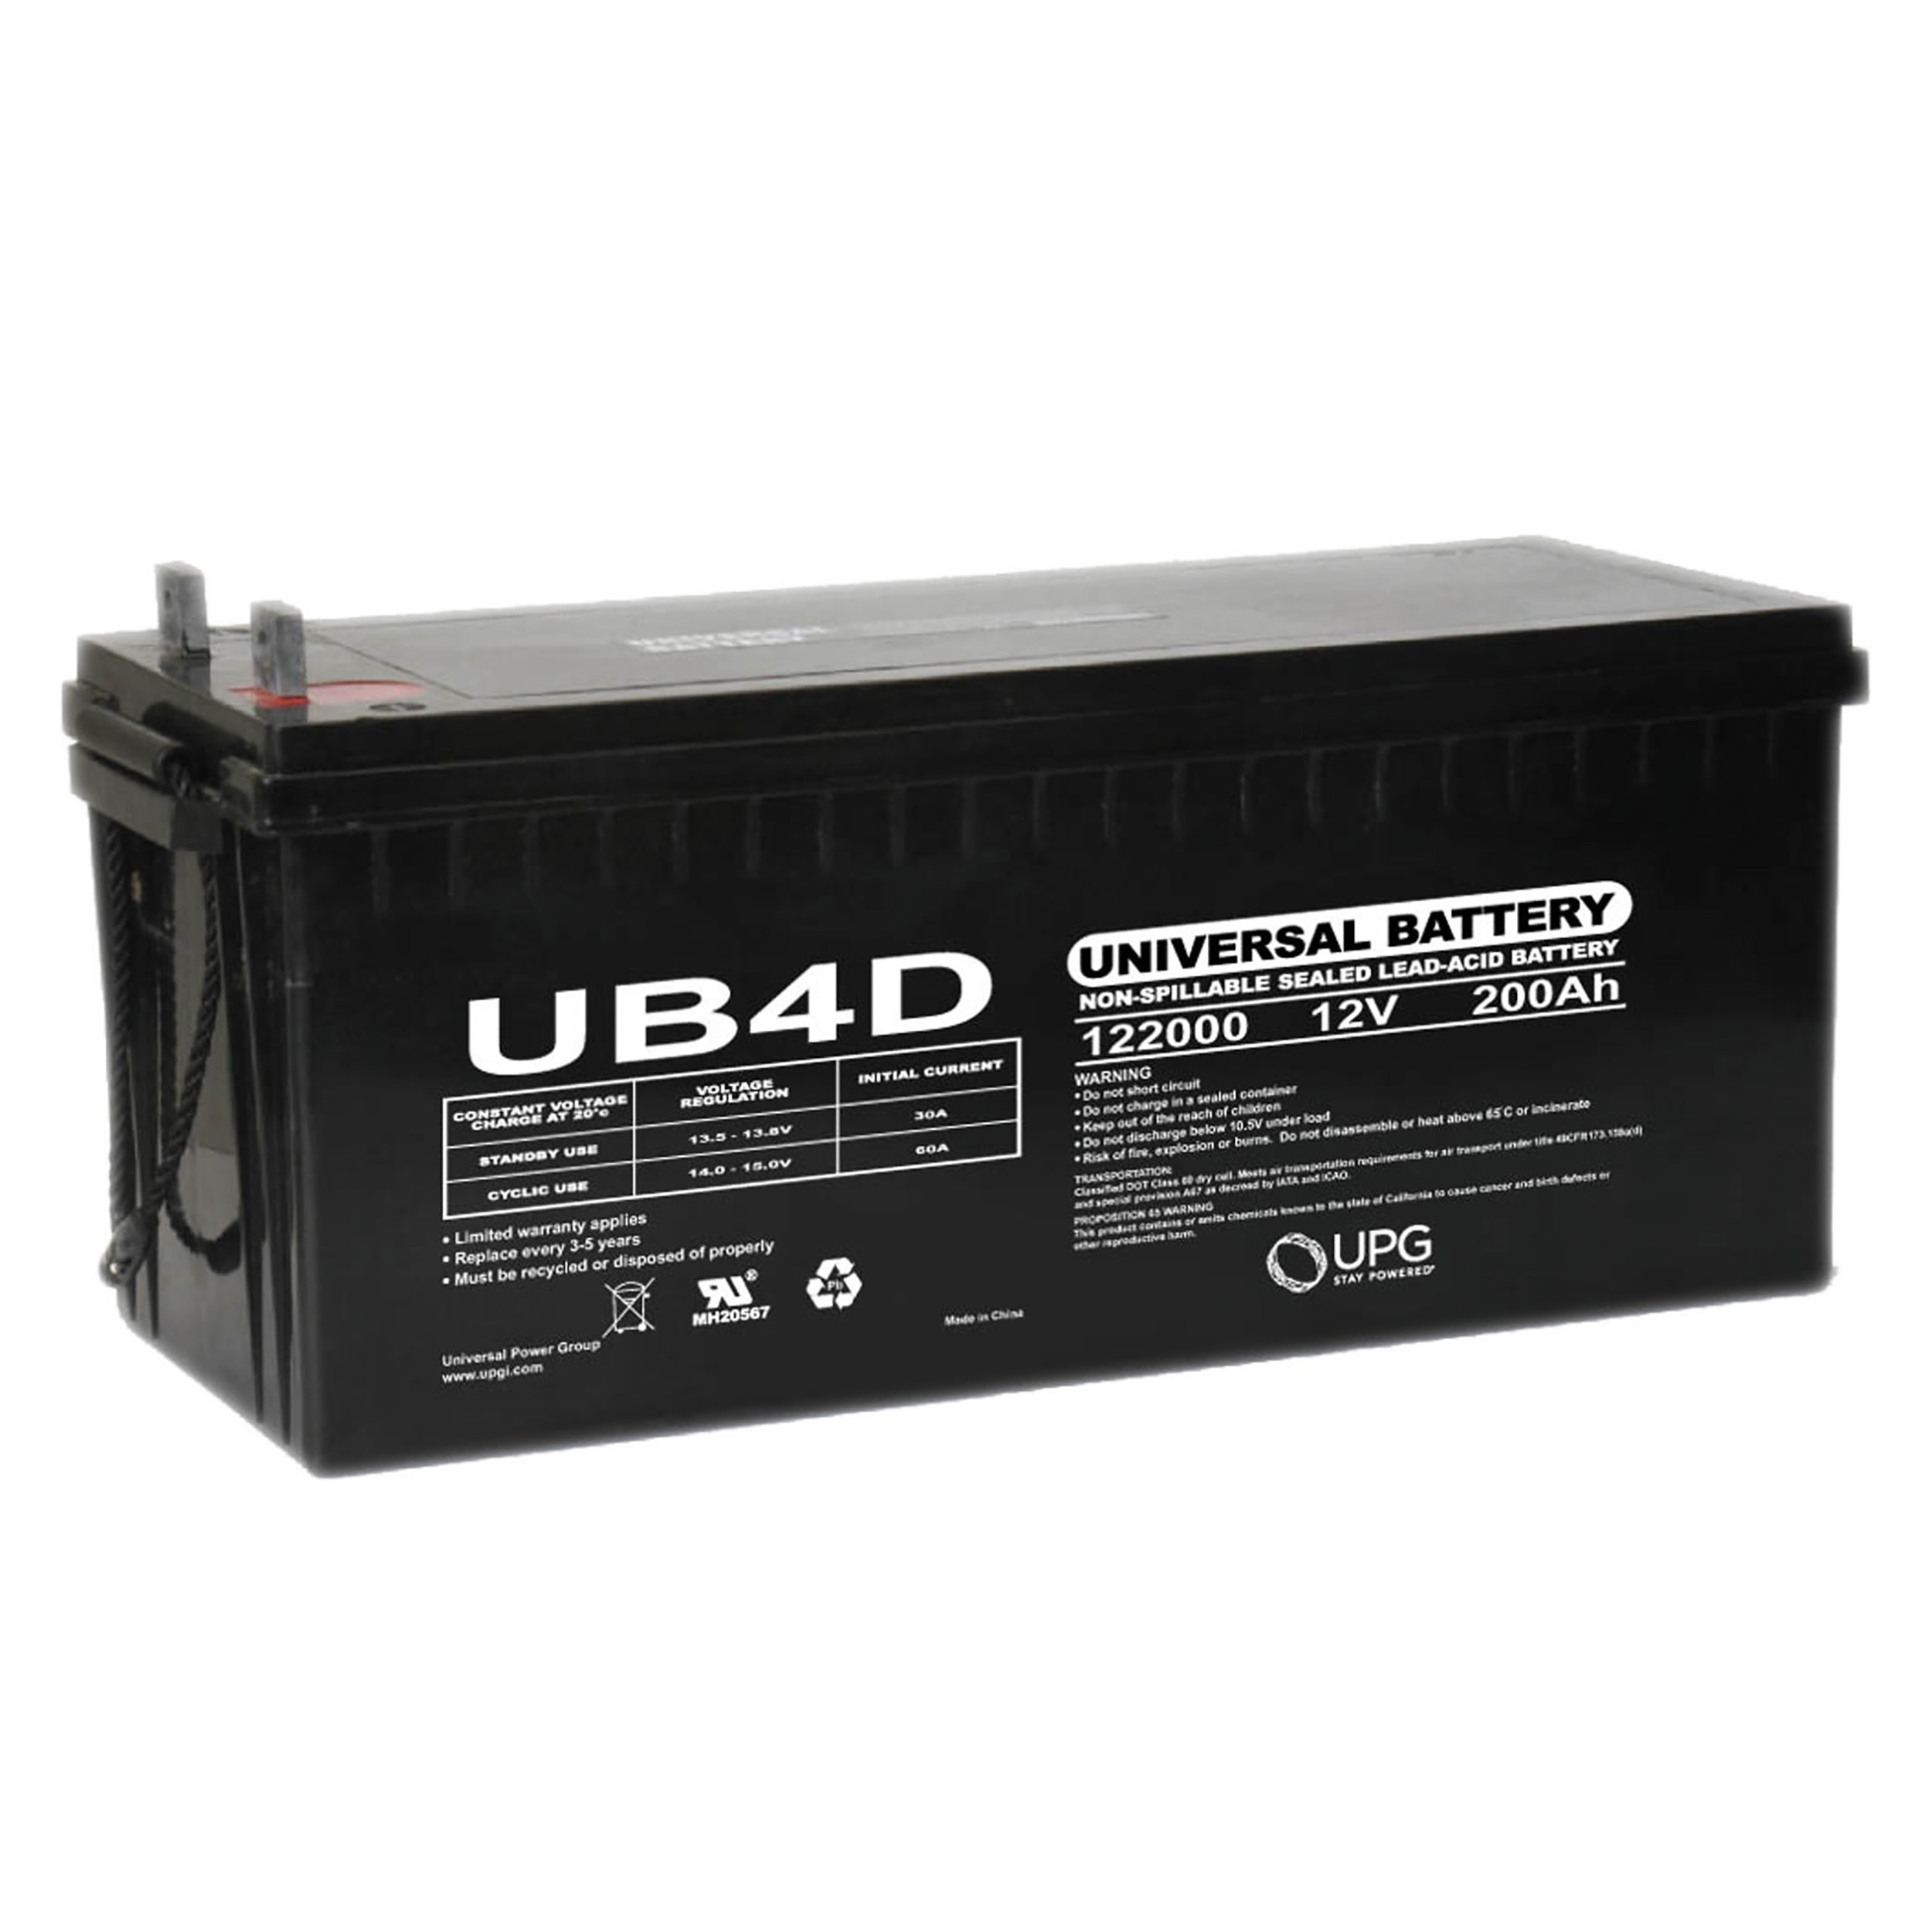 Picture of a Universal 4D Battery